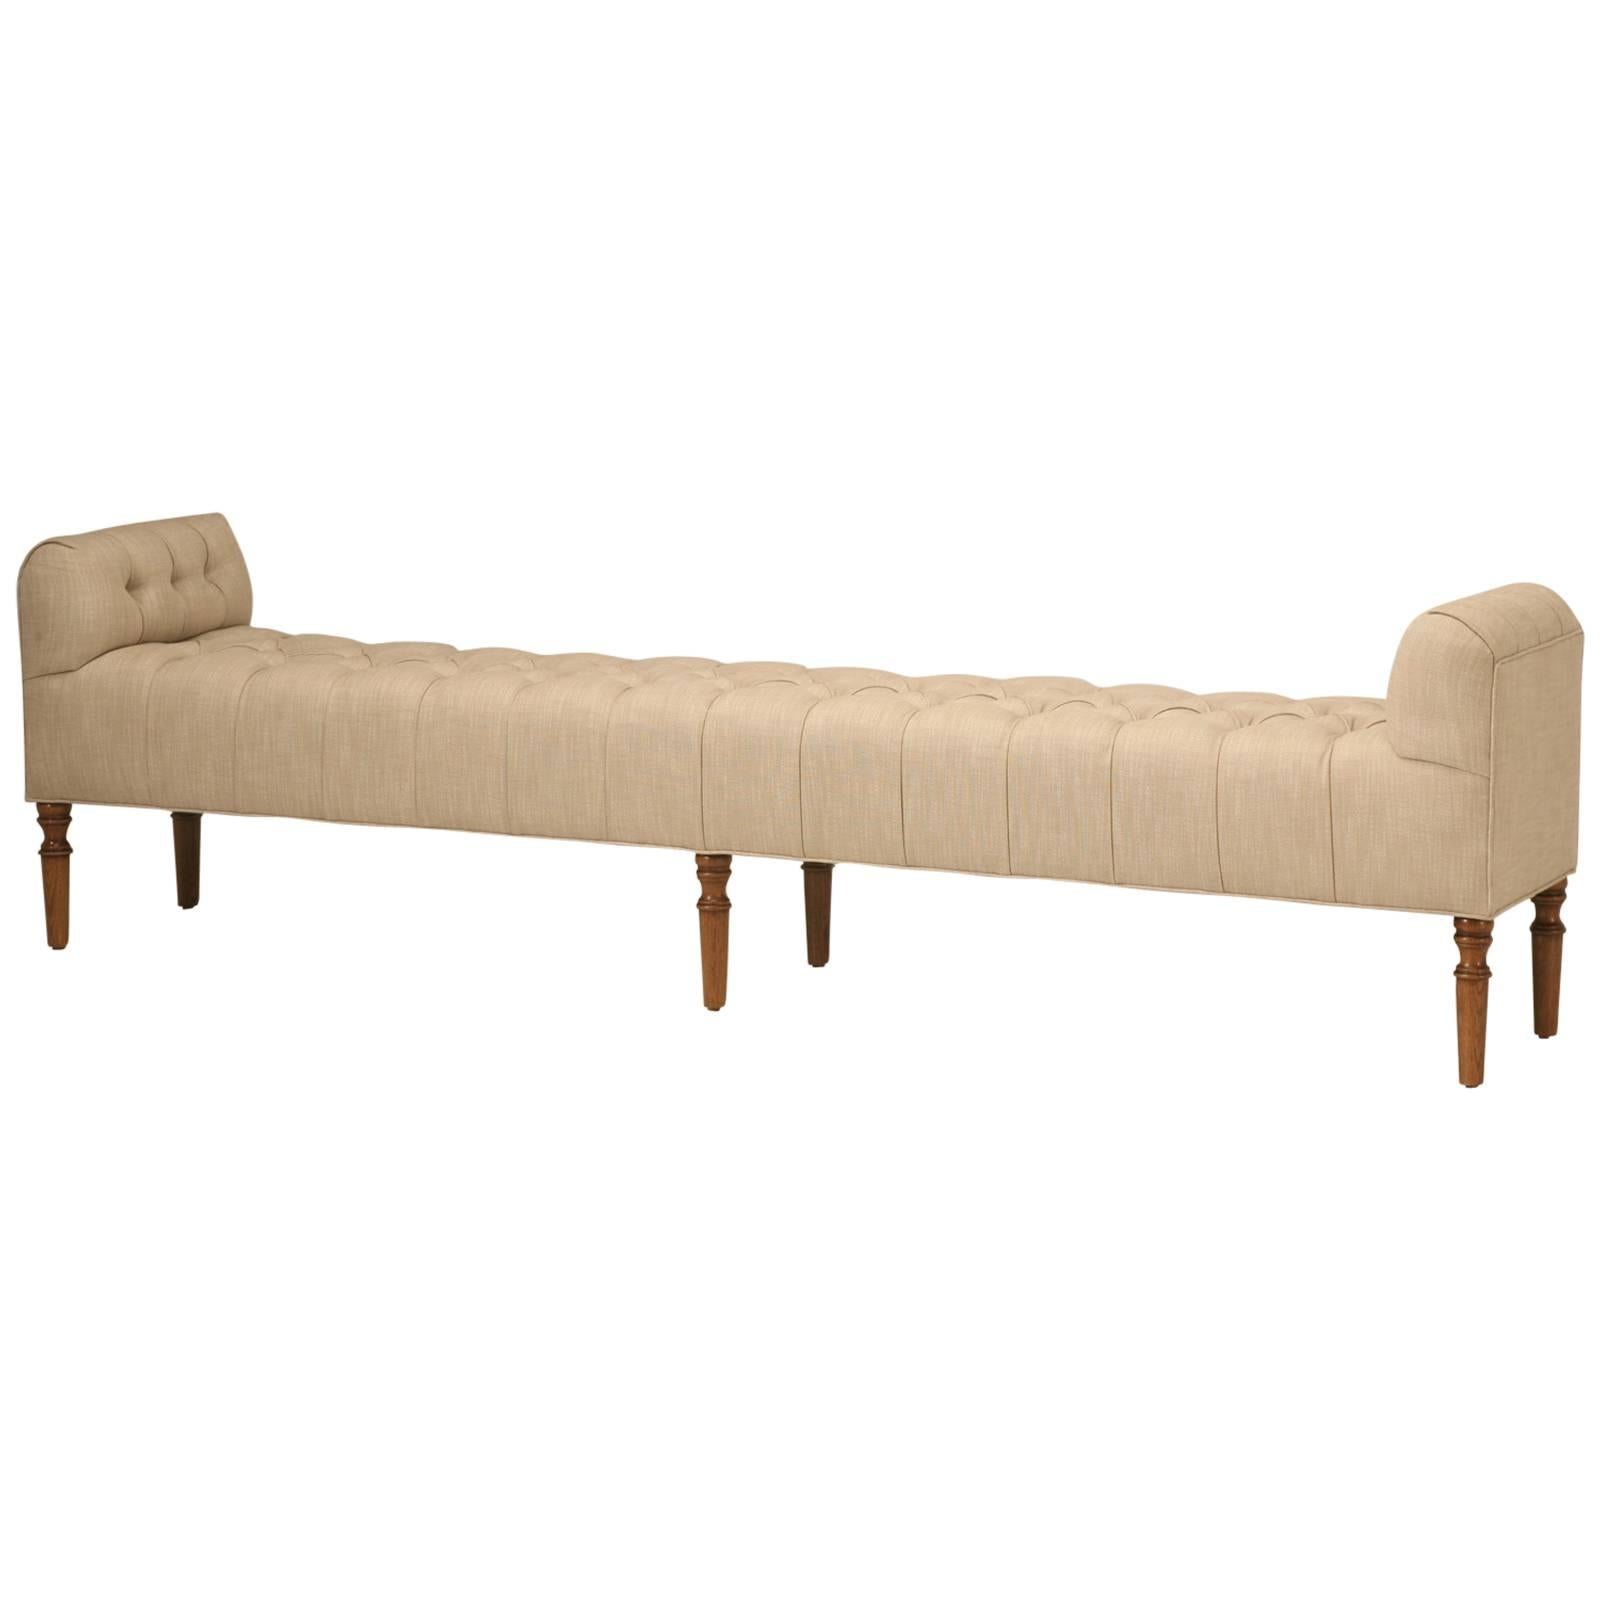 Button Tufted Bench Made to Order in Any Dimension by Old Plank  For Sale